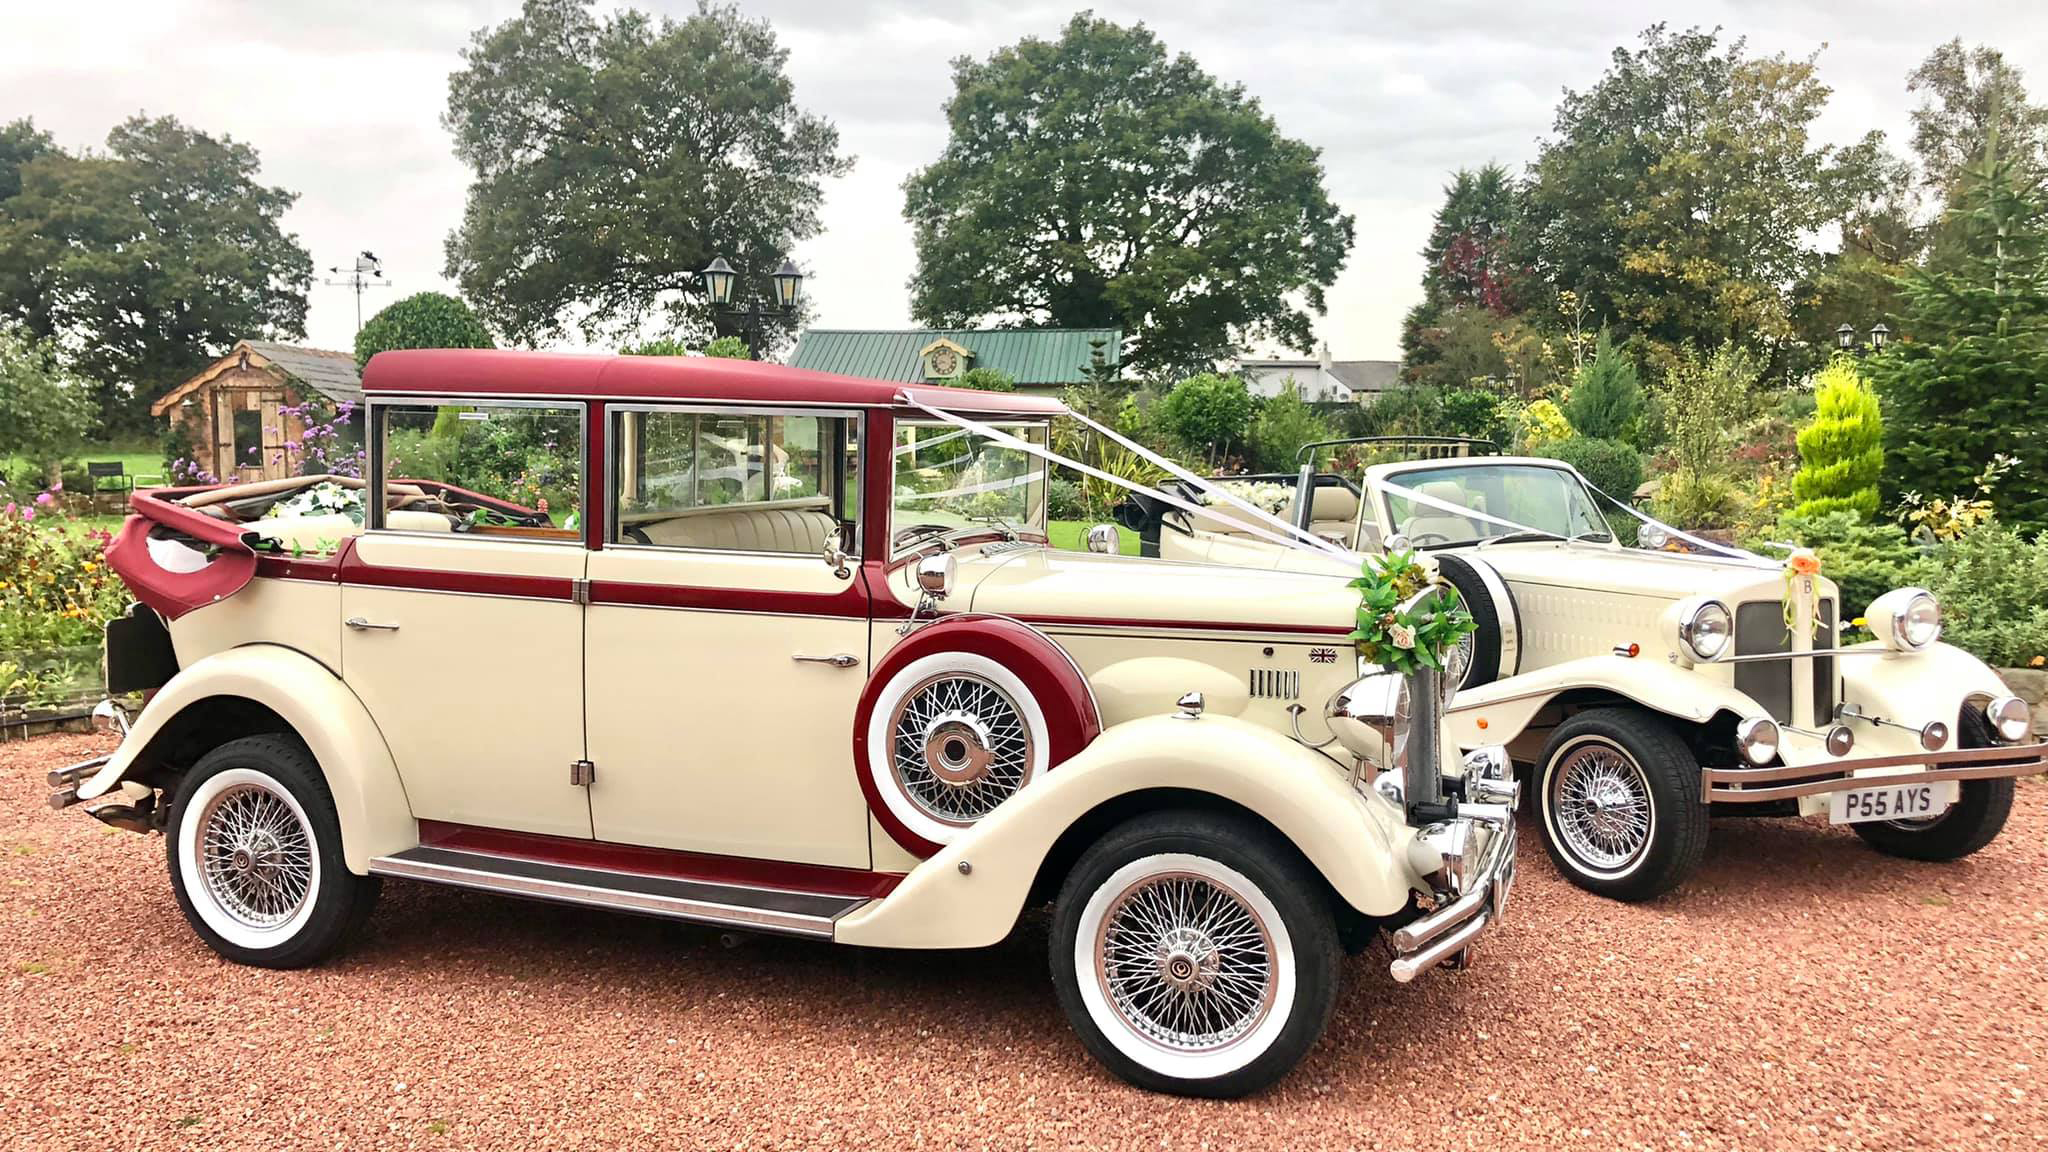 Two vintage wedding cars decorated with white ribbons at a local Wigan wedding. Both vehicles are parked side-by-side